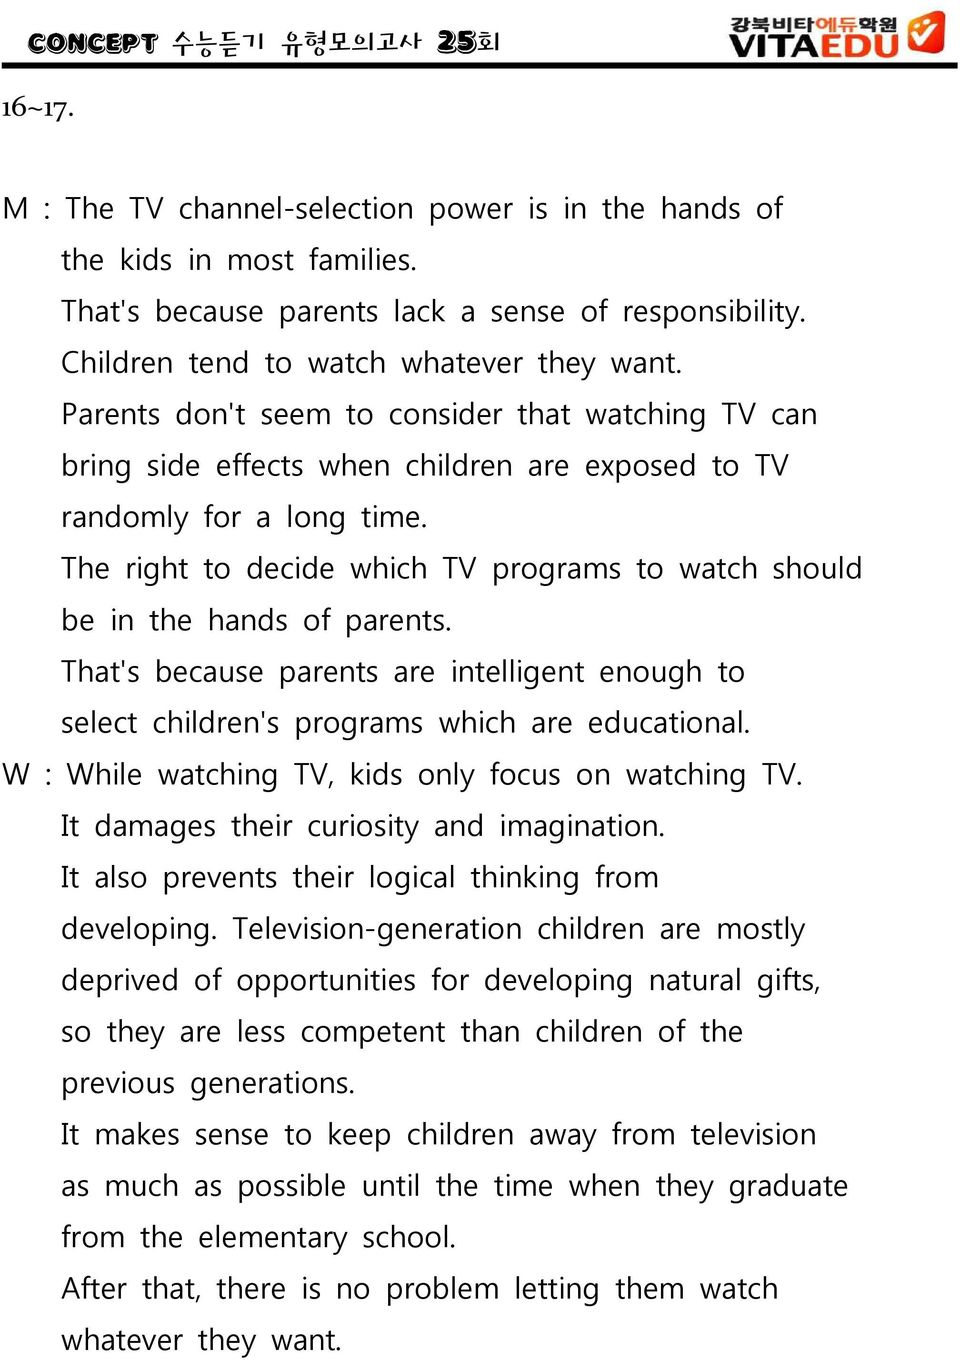 The right to decide which TV programs to watch should be in the hands of parents. That's because parents are intelligent enough to select children's programs which are educational.